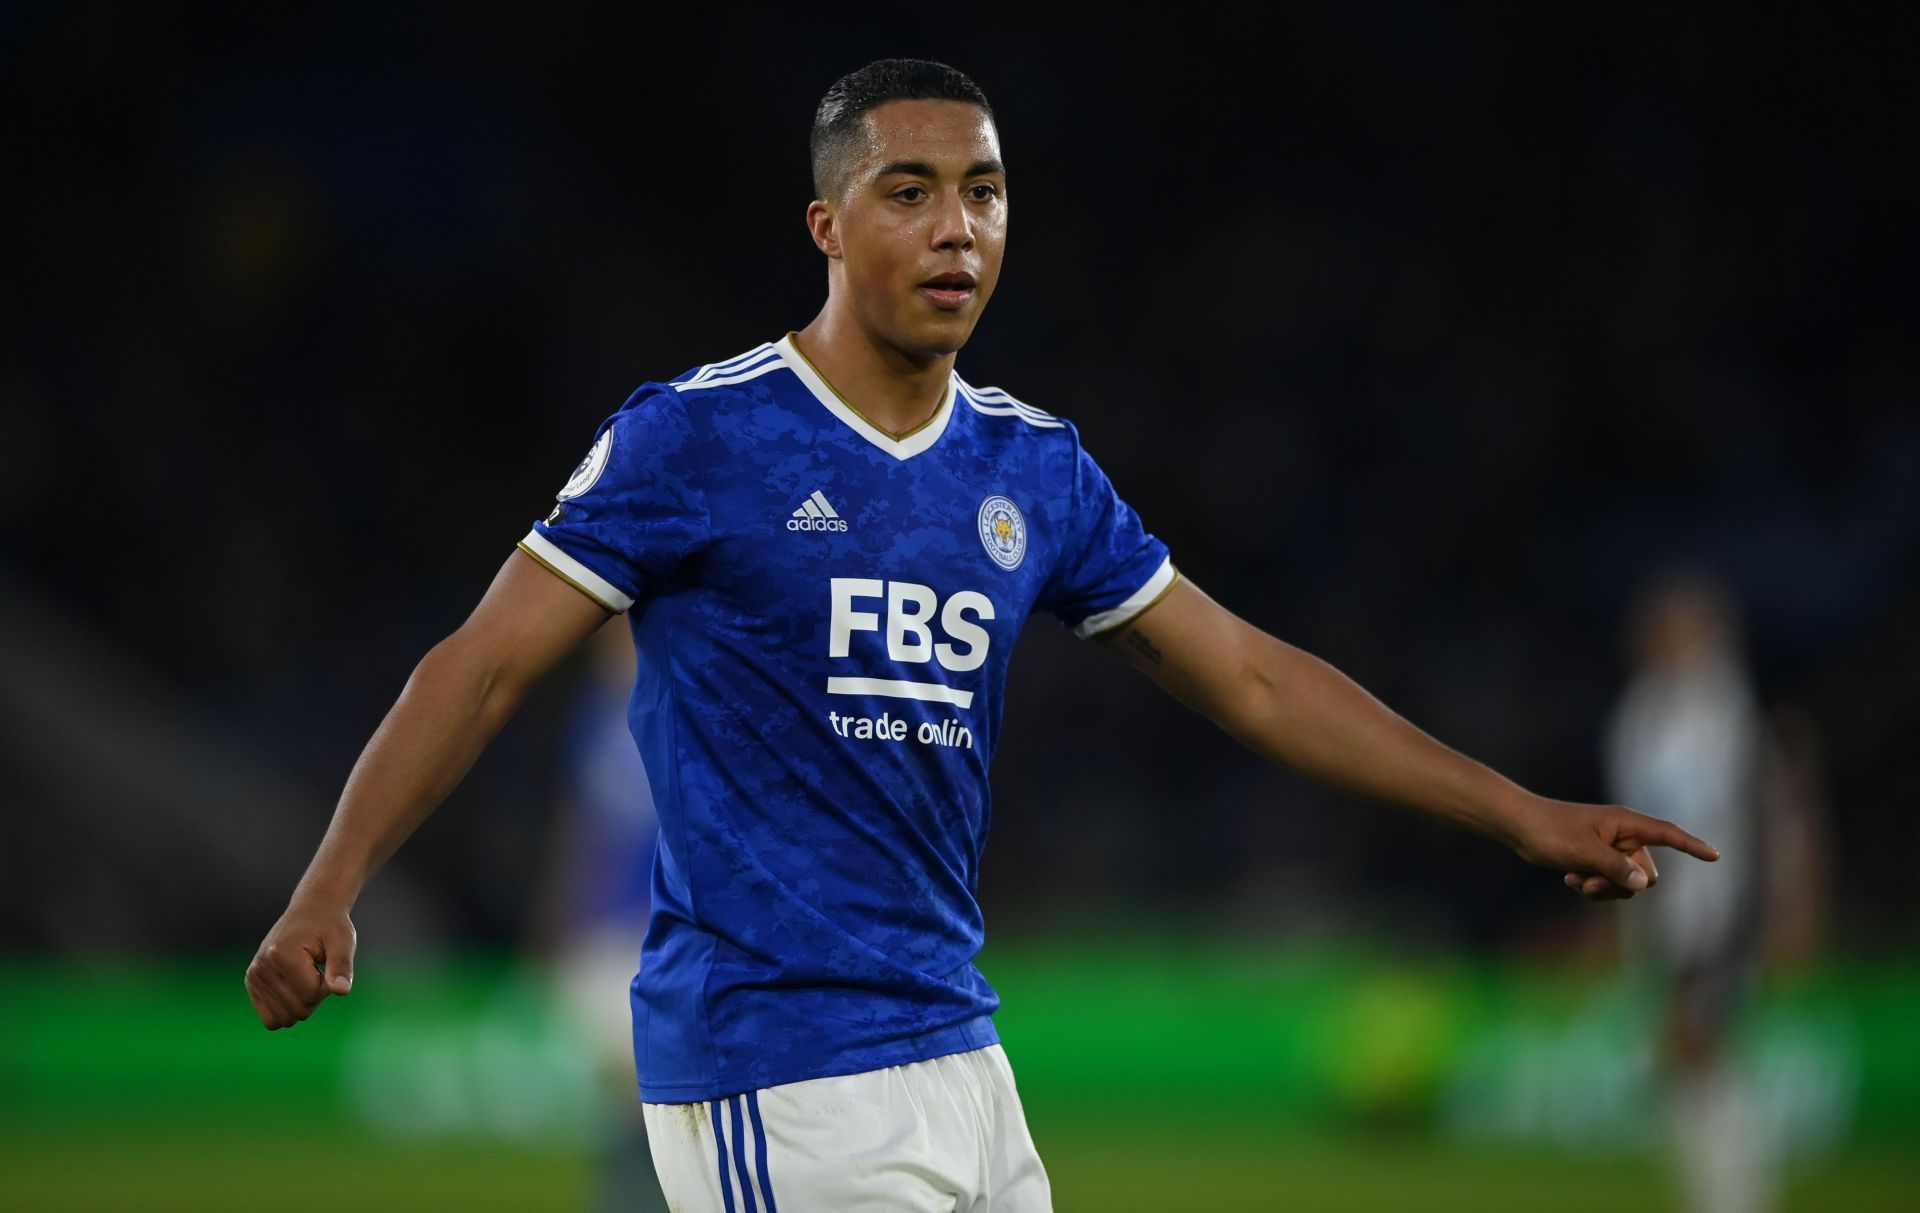 Arsenal have received a boost in their pursuit of Youri Tielemans.